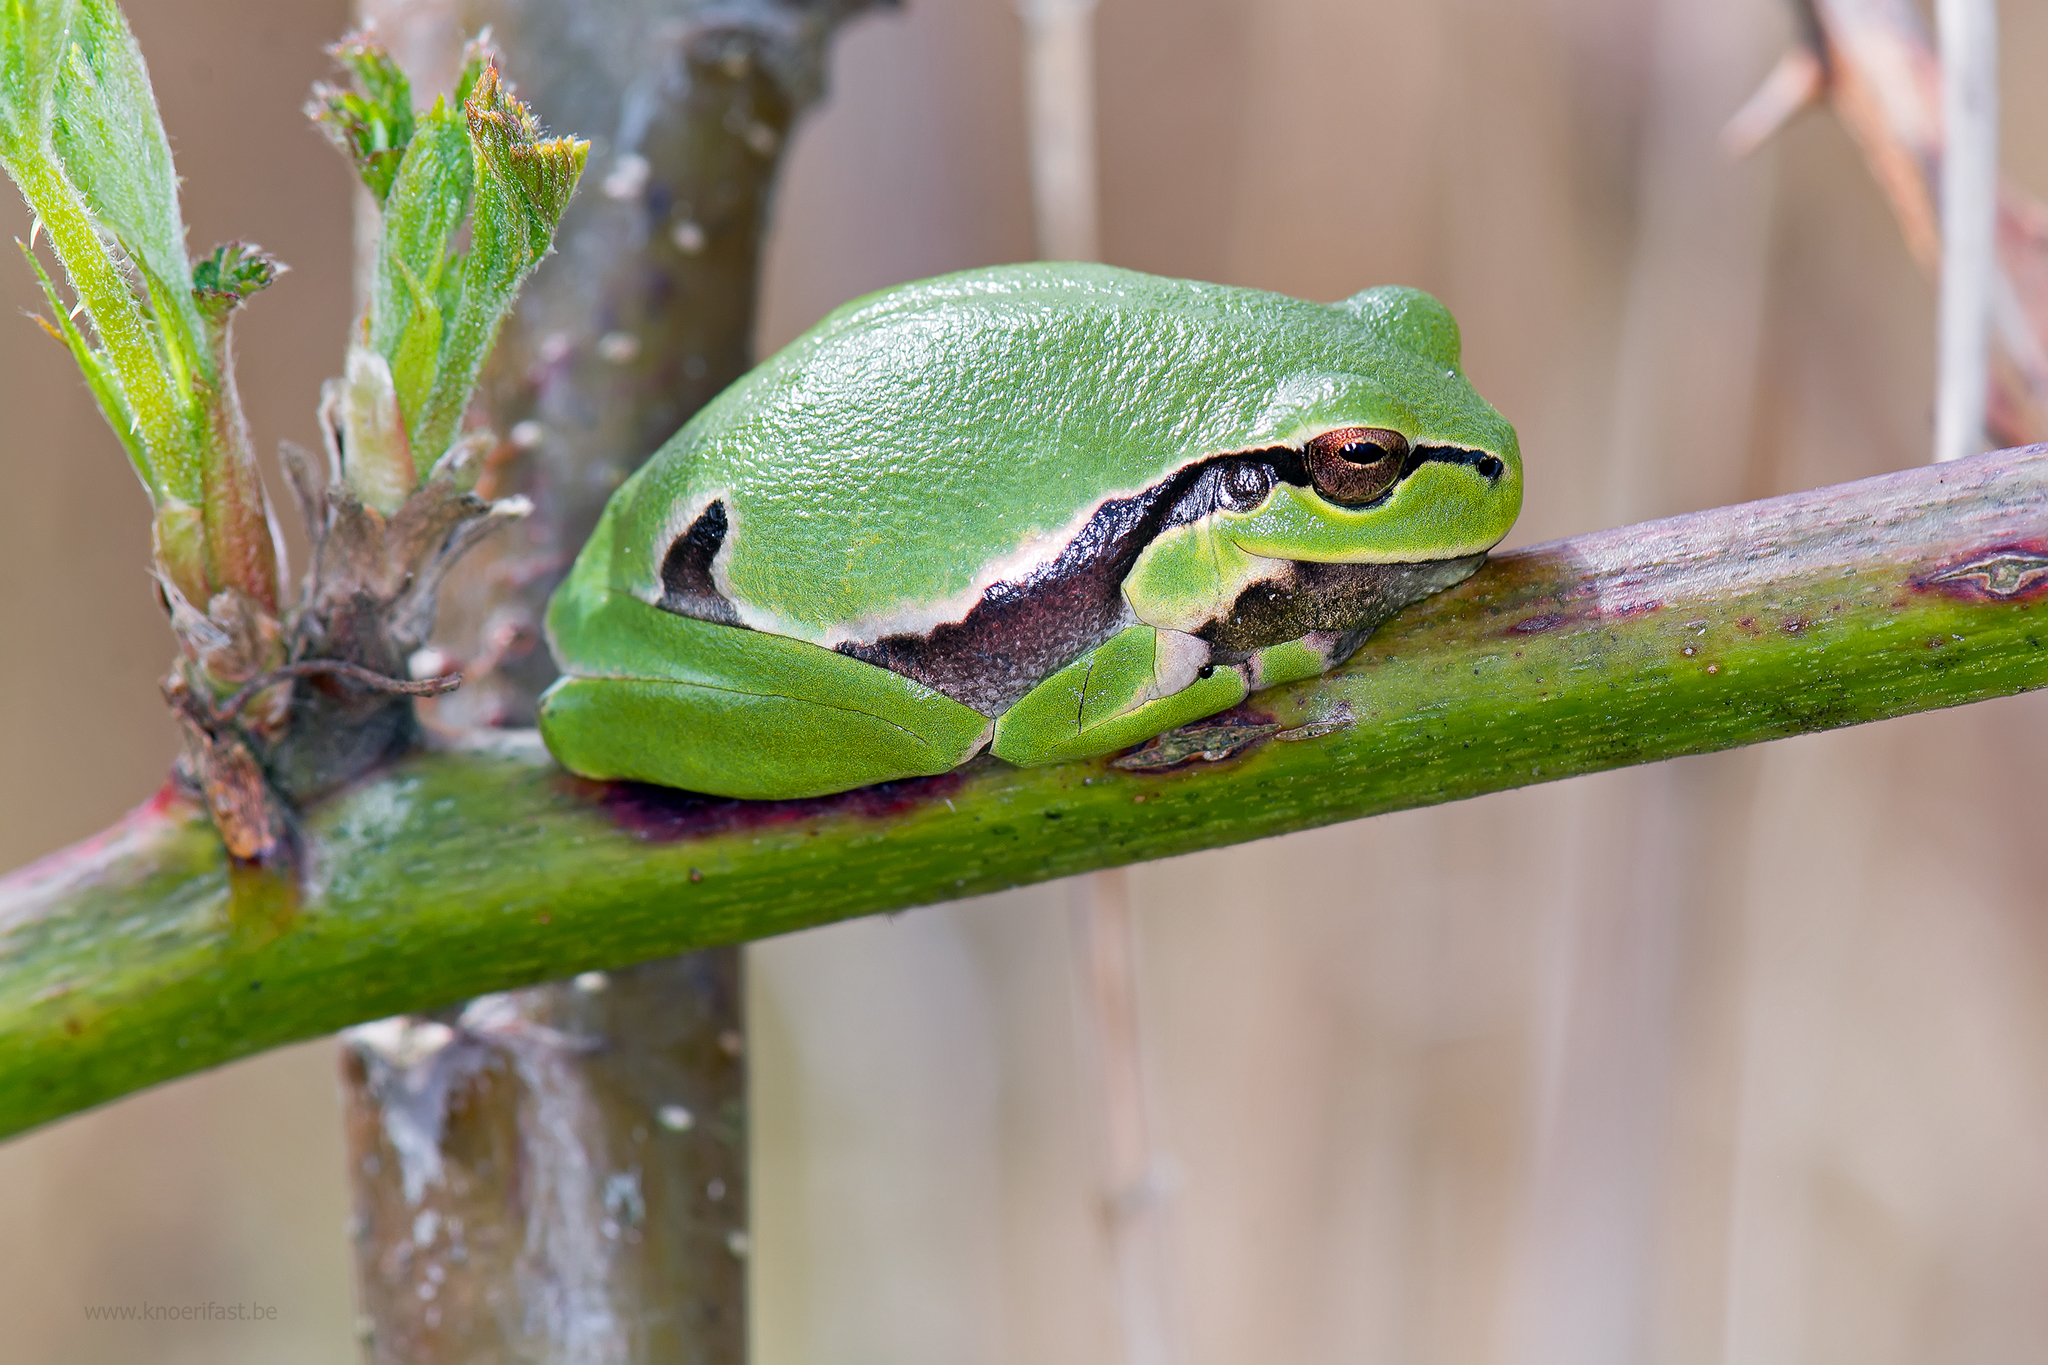 Another tree frog ...